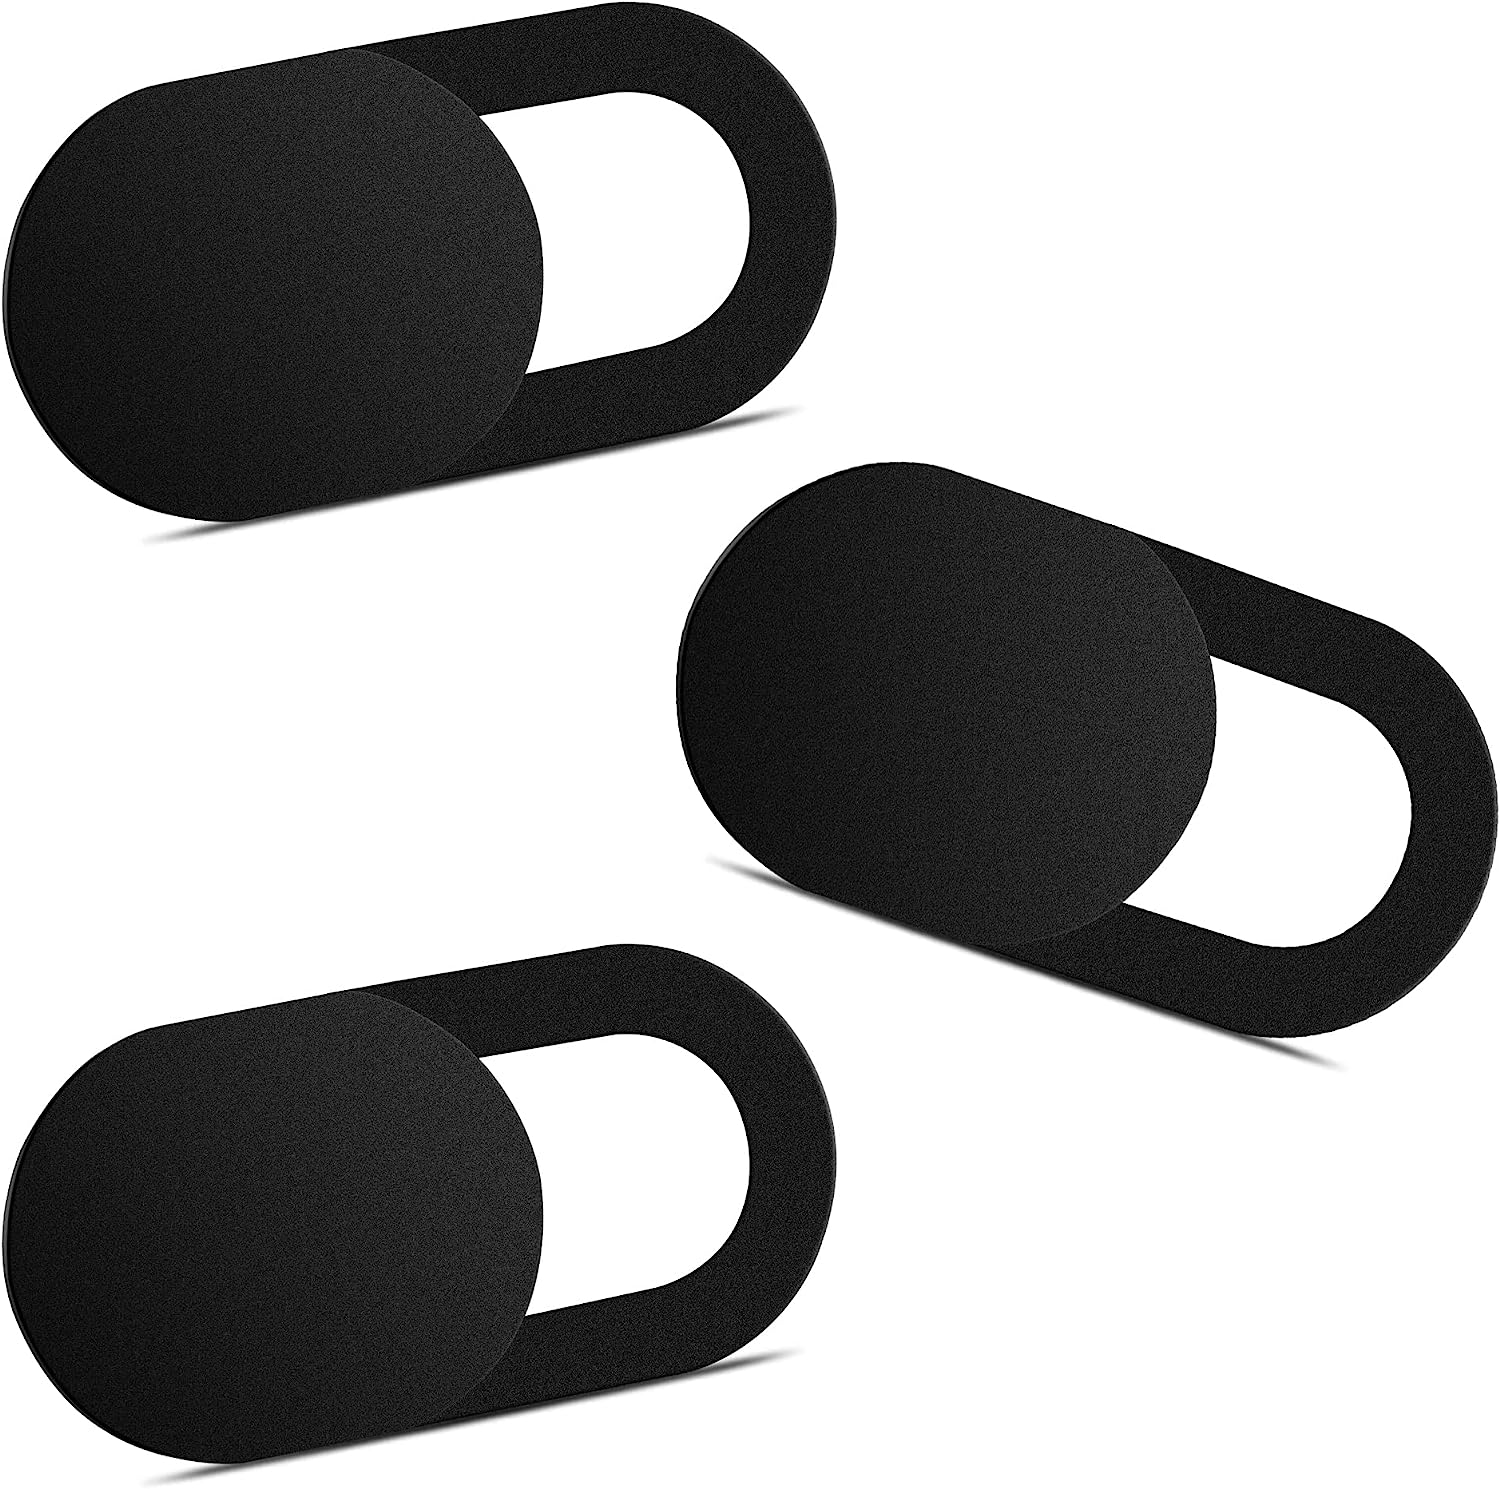 Yilador Webcam Cover (3 Pack), 0.03 inch Ultra Thin [...]